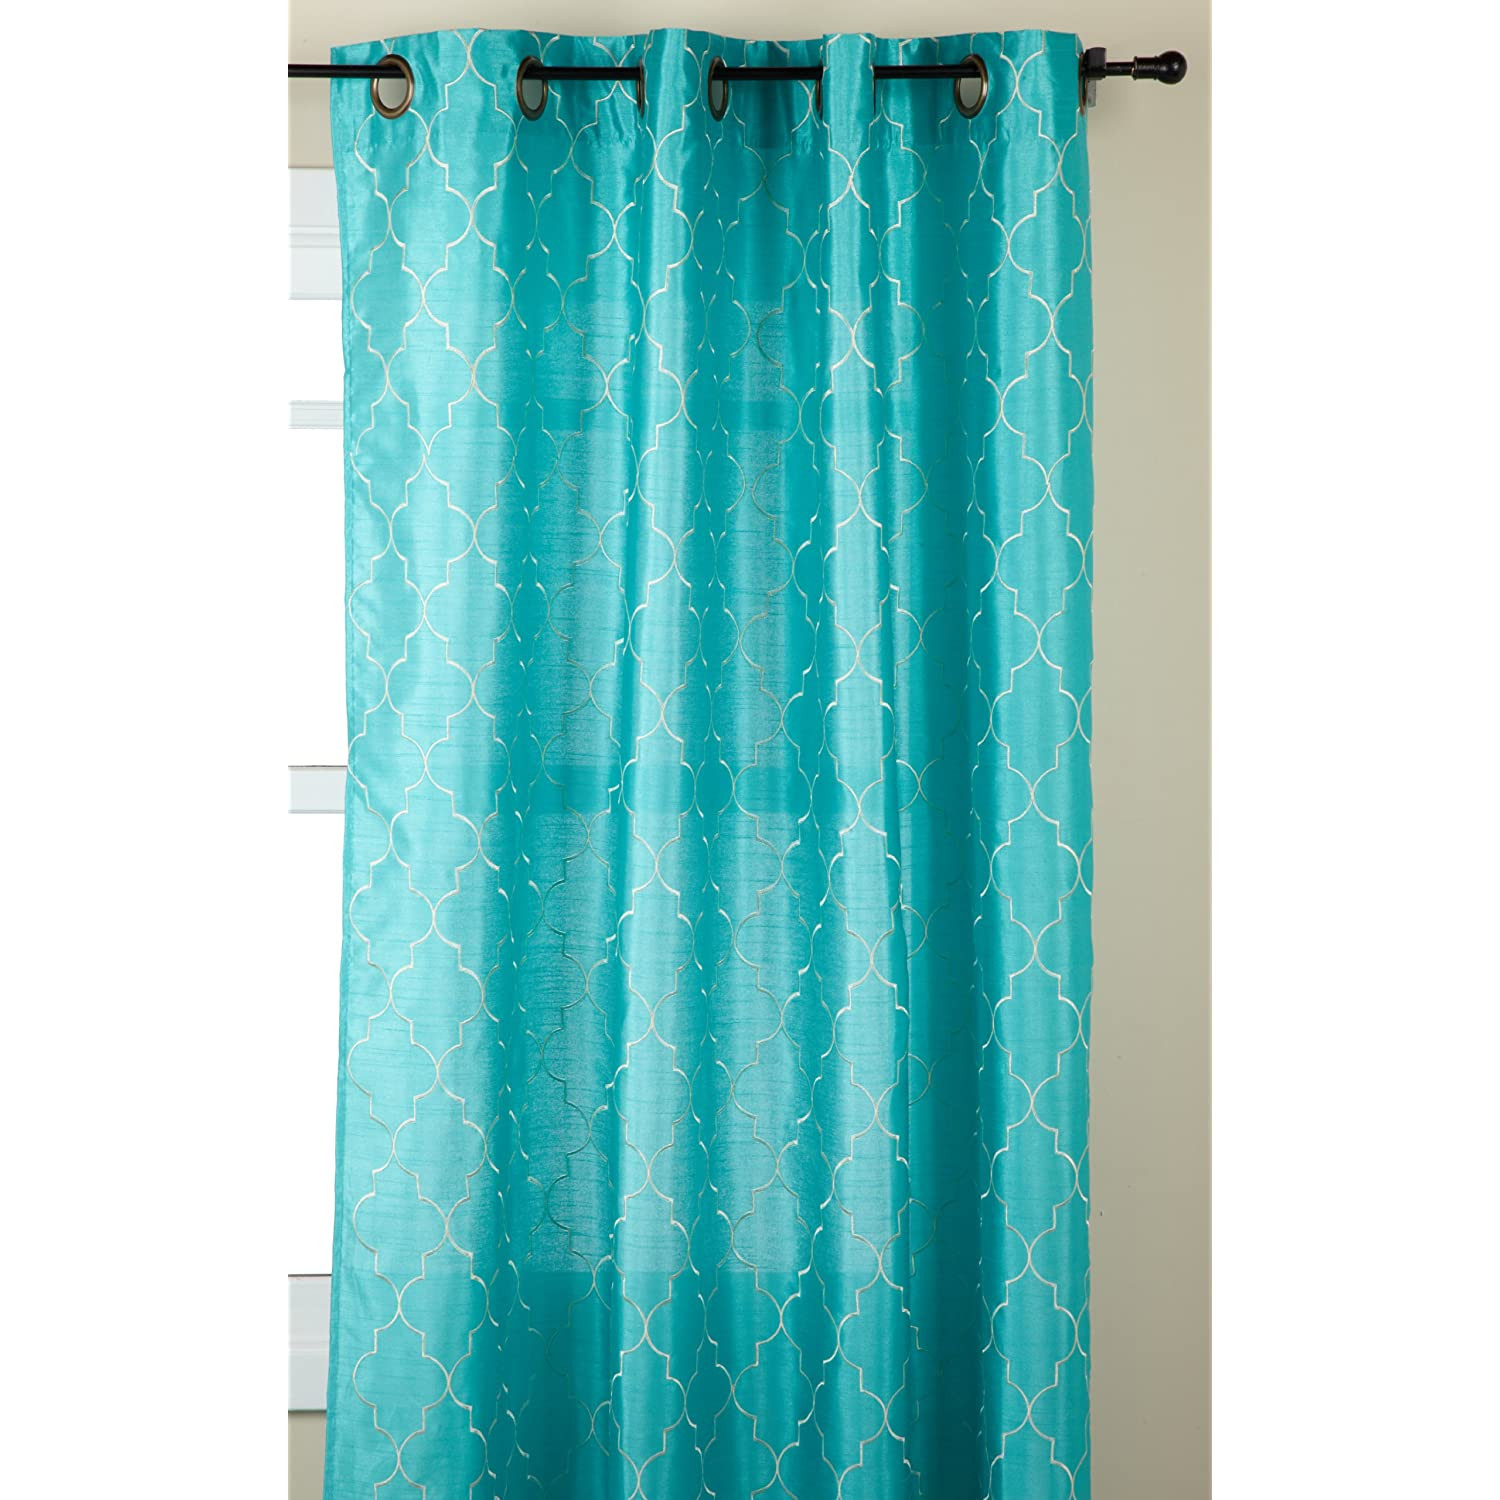 Turquoise Kitchen Curtains
 Turquoise curtains homey type stuffs